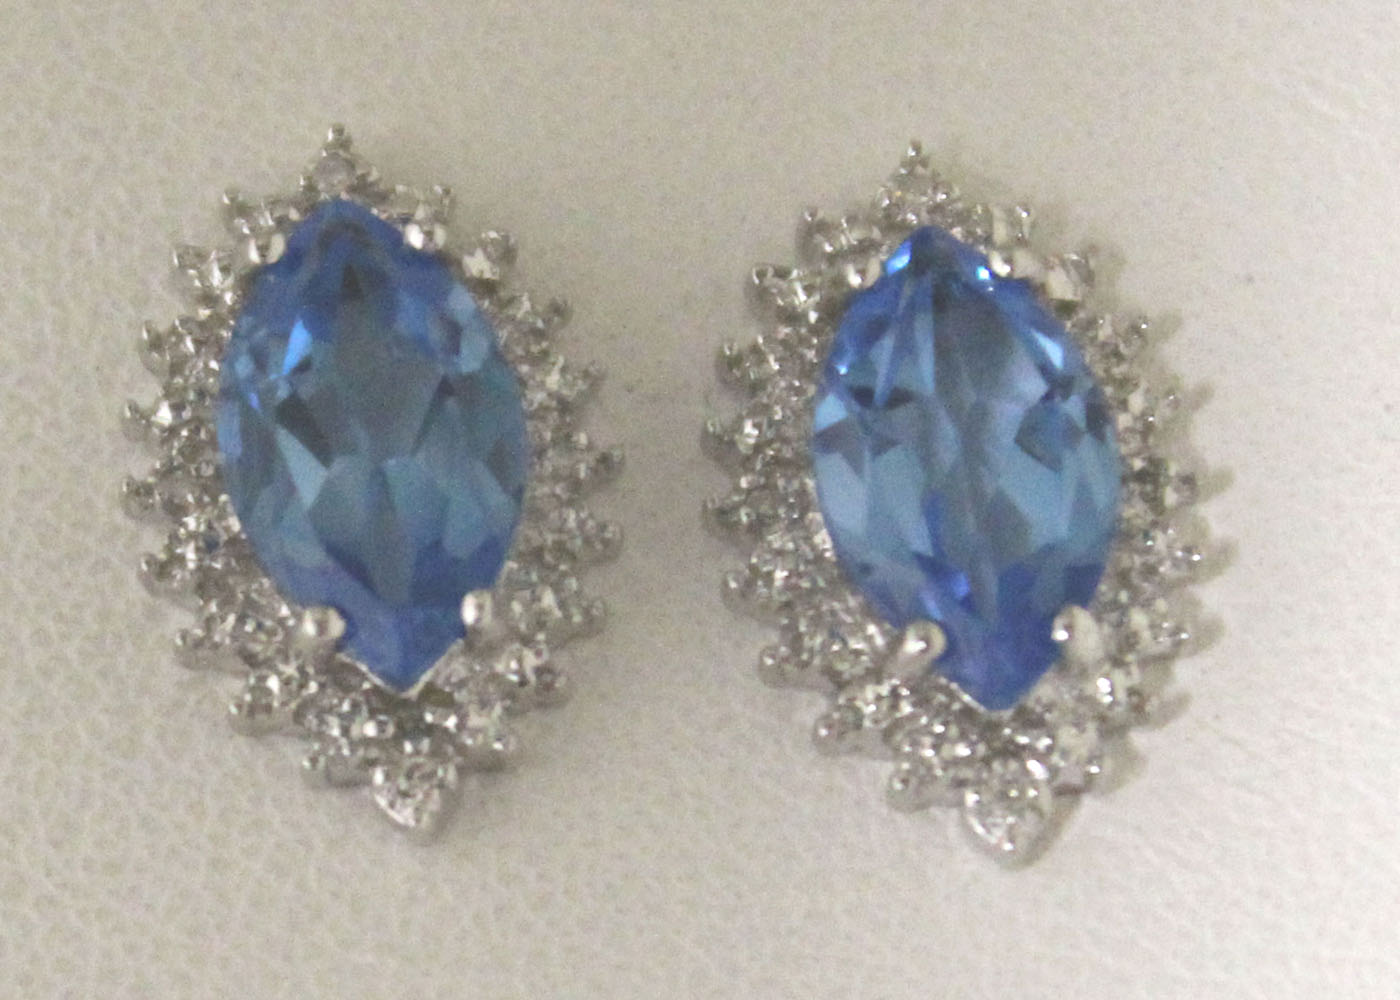 9ct White Gold Diamond and Blue Topaz Earring (BT3.73) 0.02 Carats - Image 4 of 6